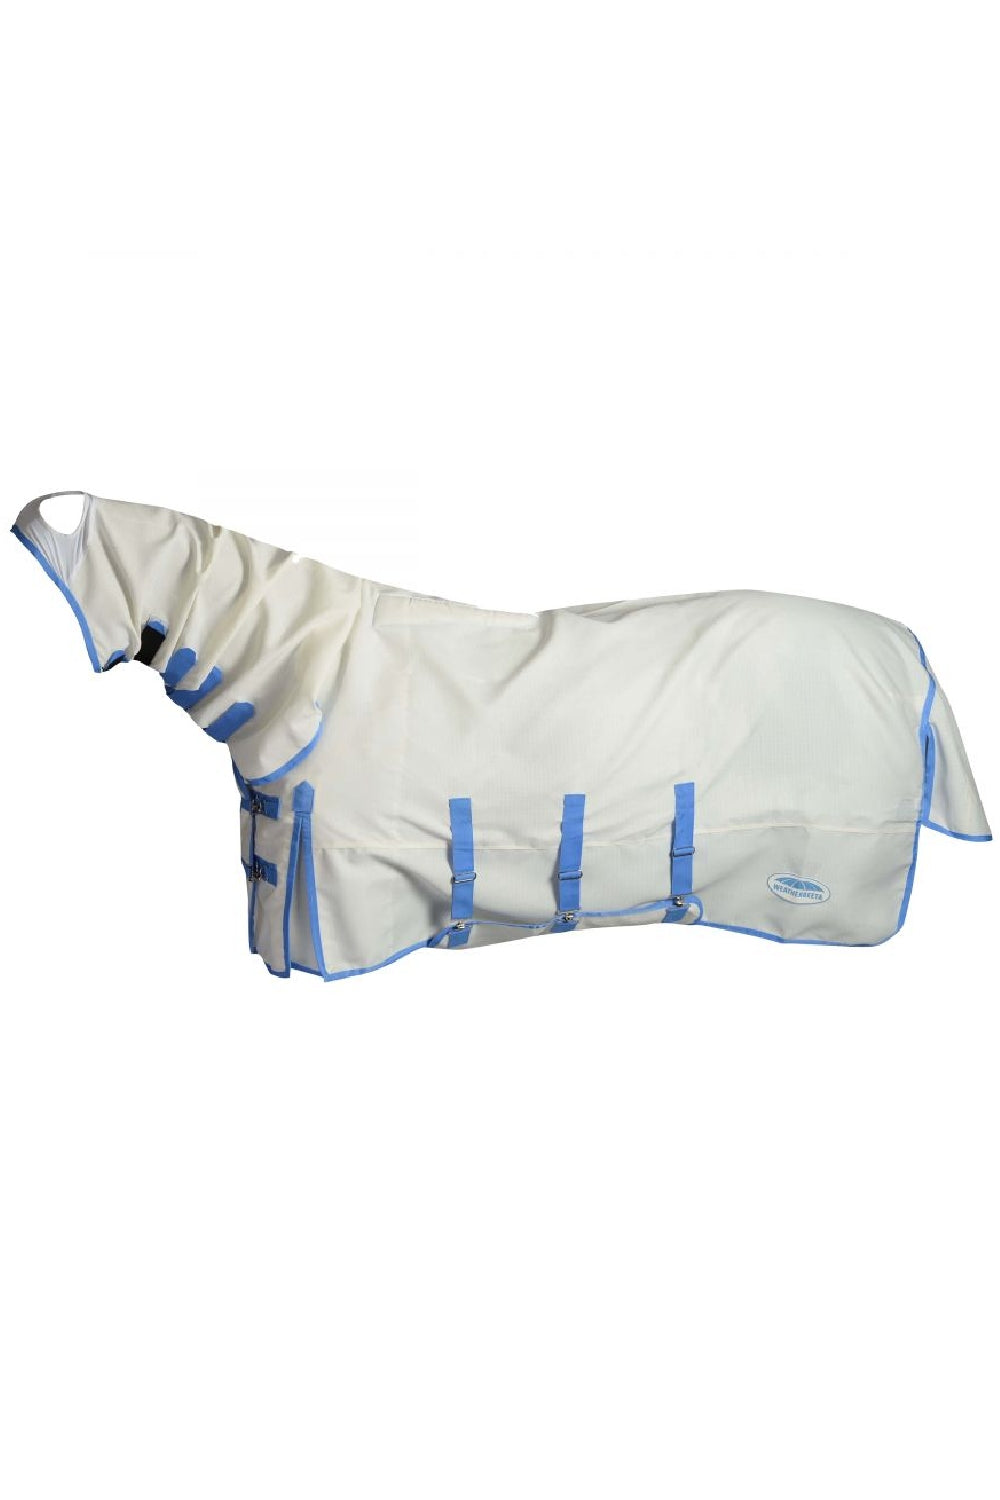 WeatherBeeta Sweet Itch Shield Combo Neck in White/Blue